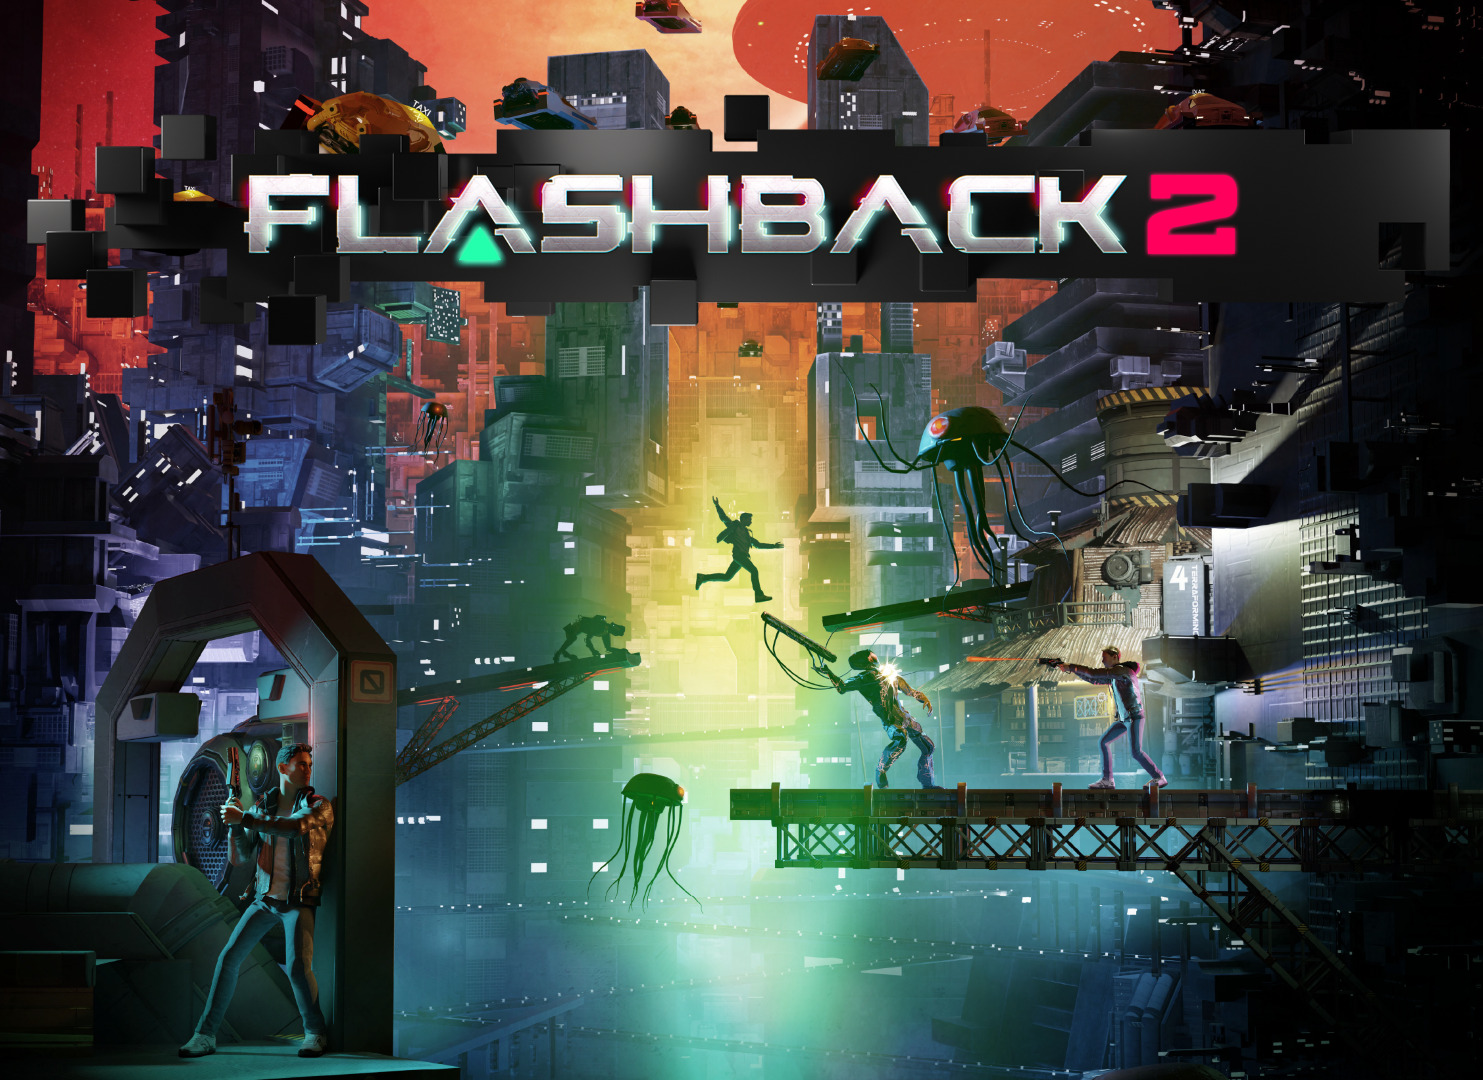 Flashback 2's new trailer is here